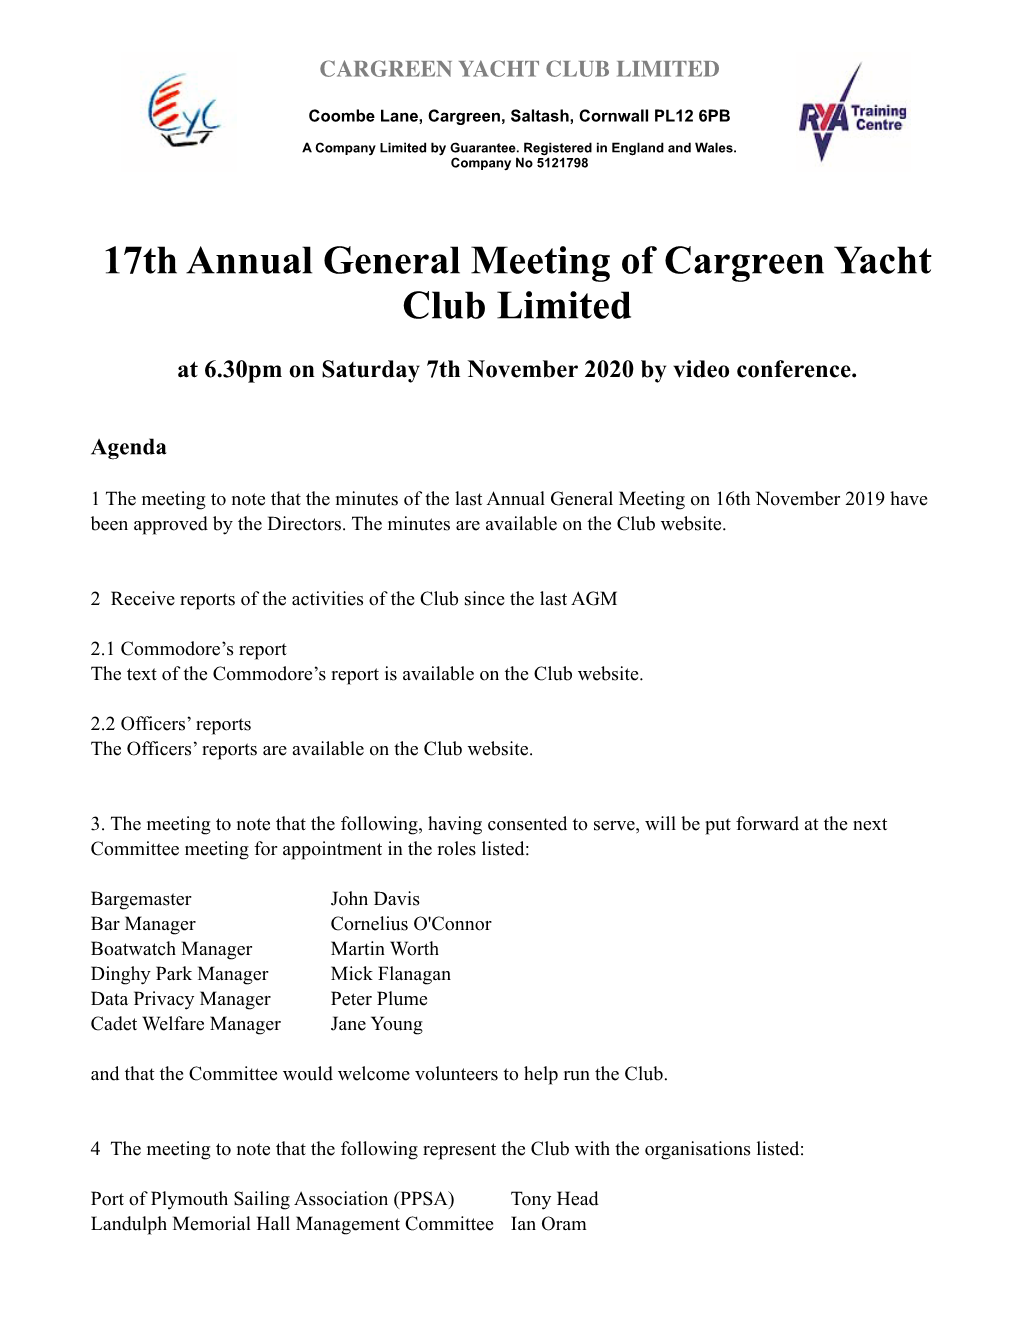 17Th Annual General Meeting of Cargreen Yacht Club Limited